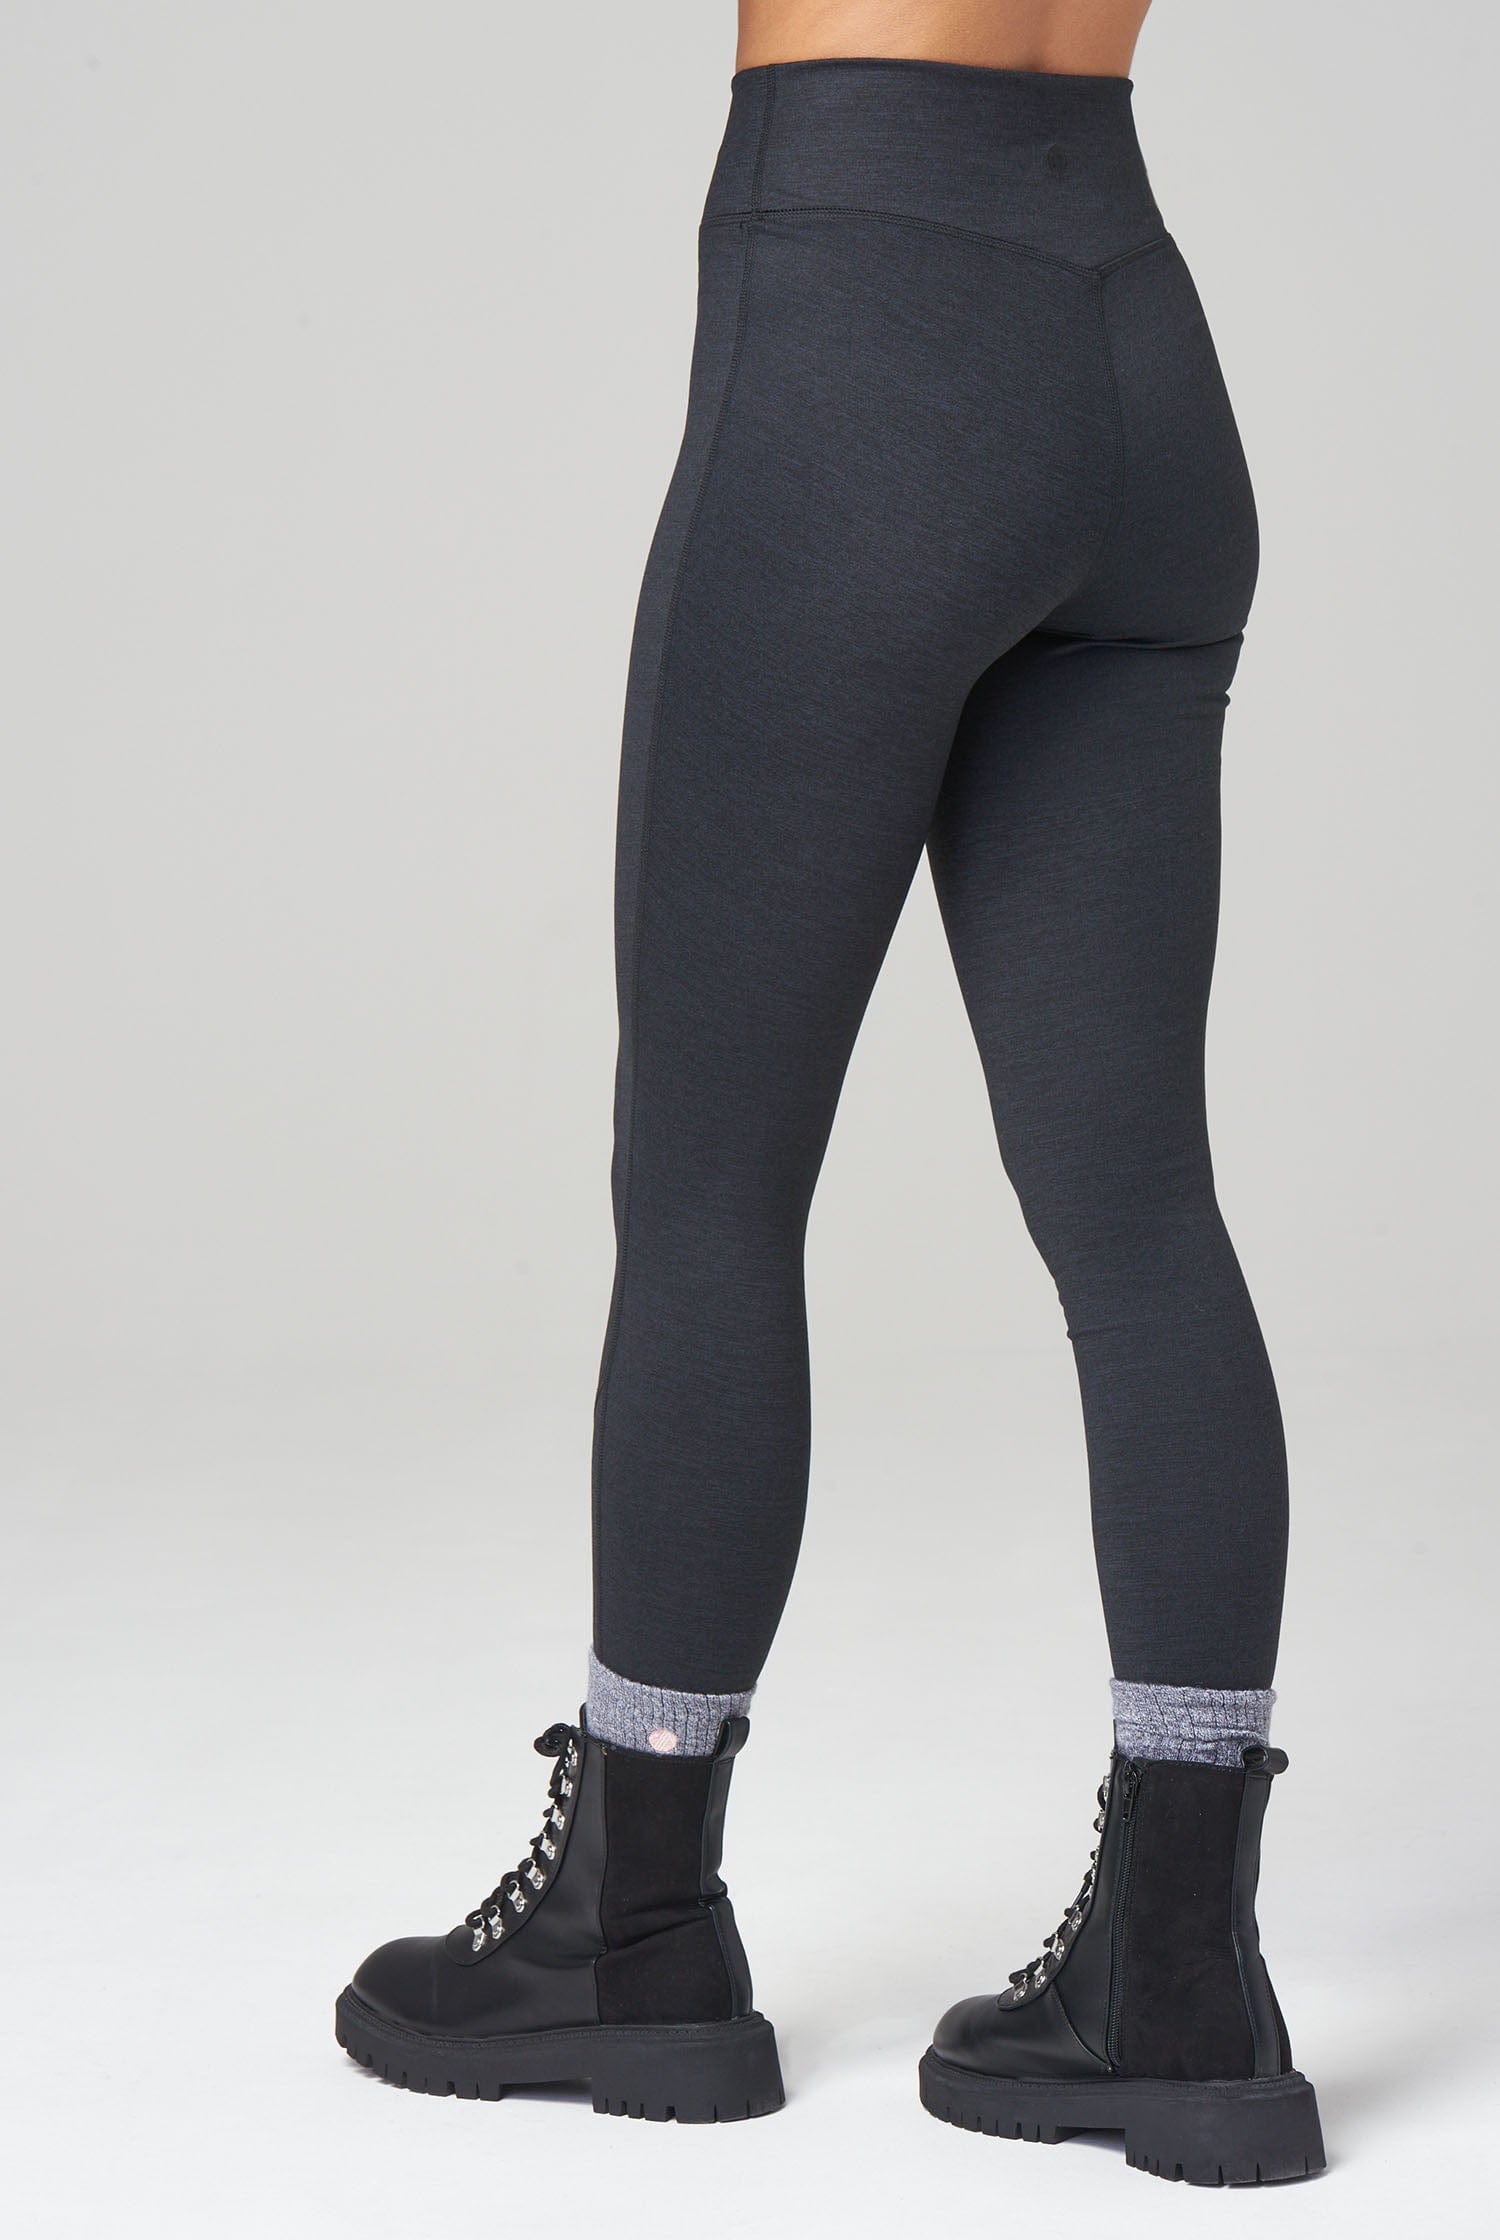 Sherpatm Thermal Fleece Lined Leggings With  International Society of  Precision Agriculture